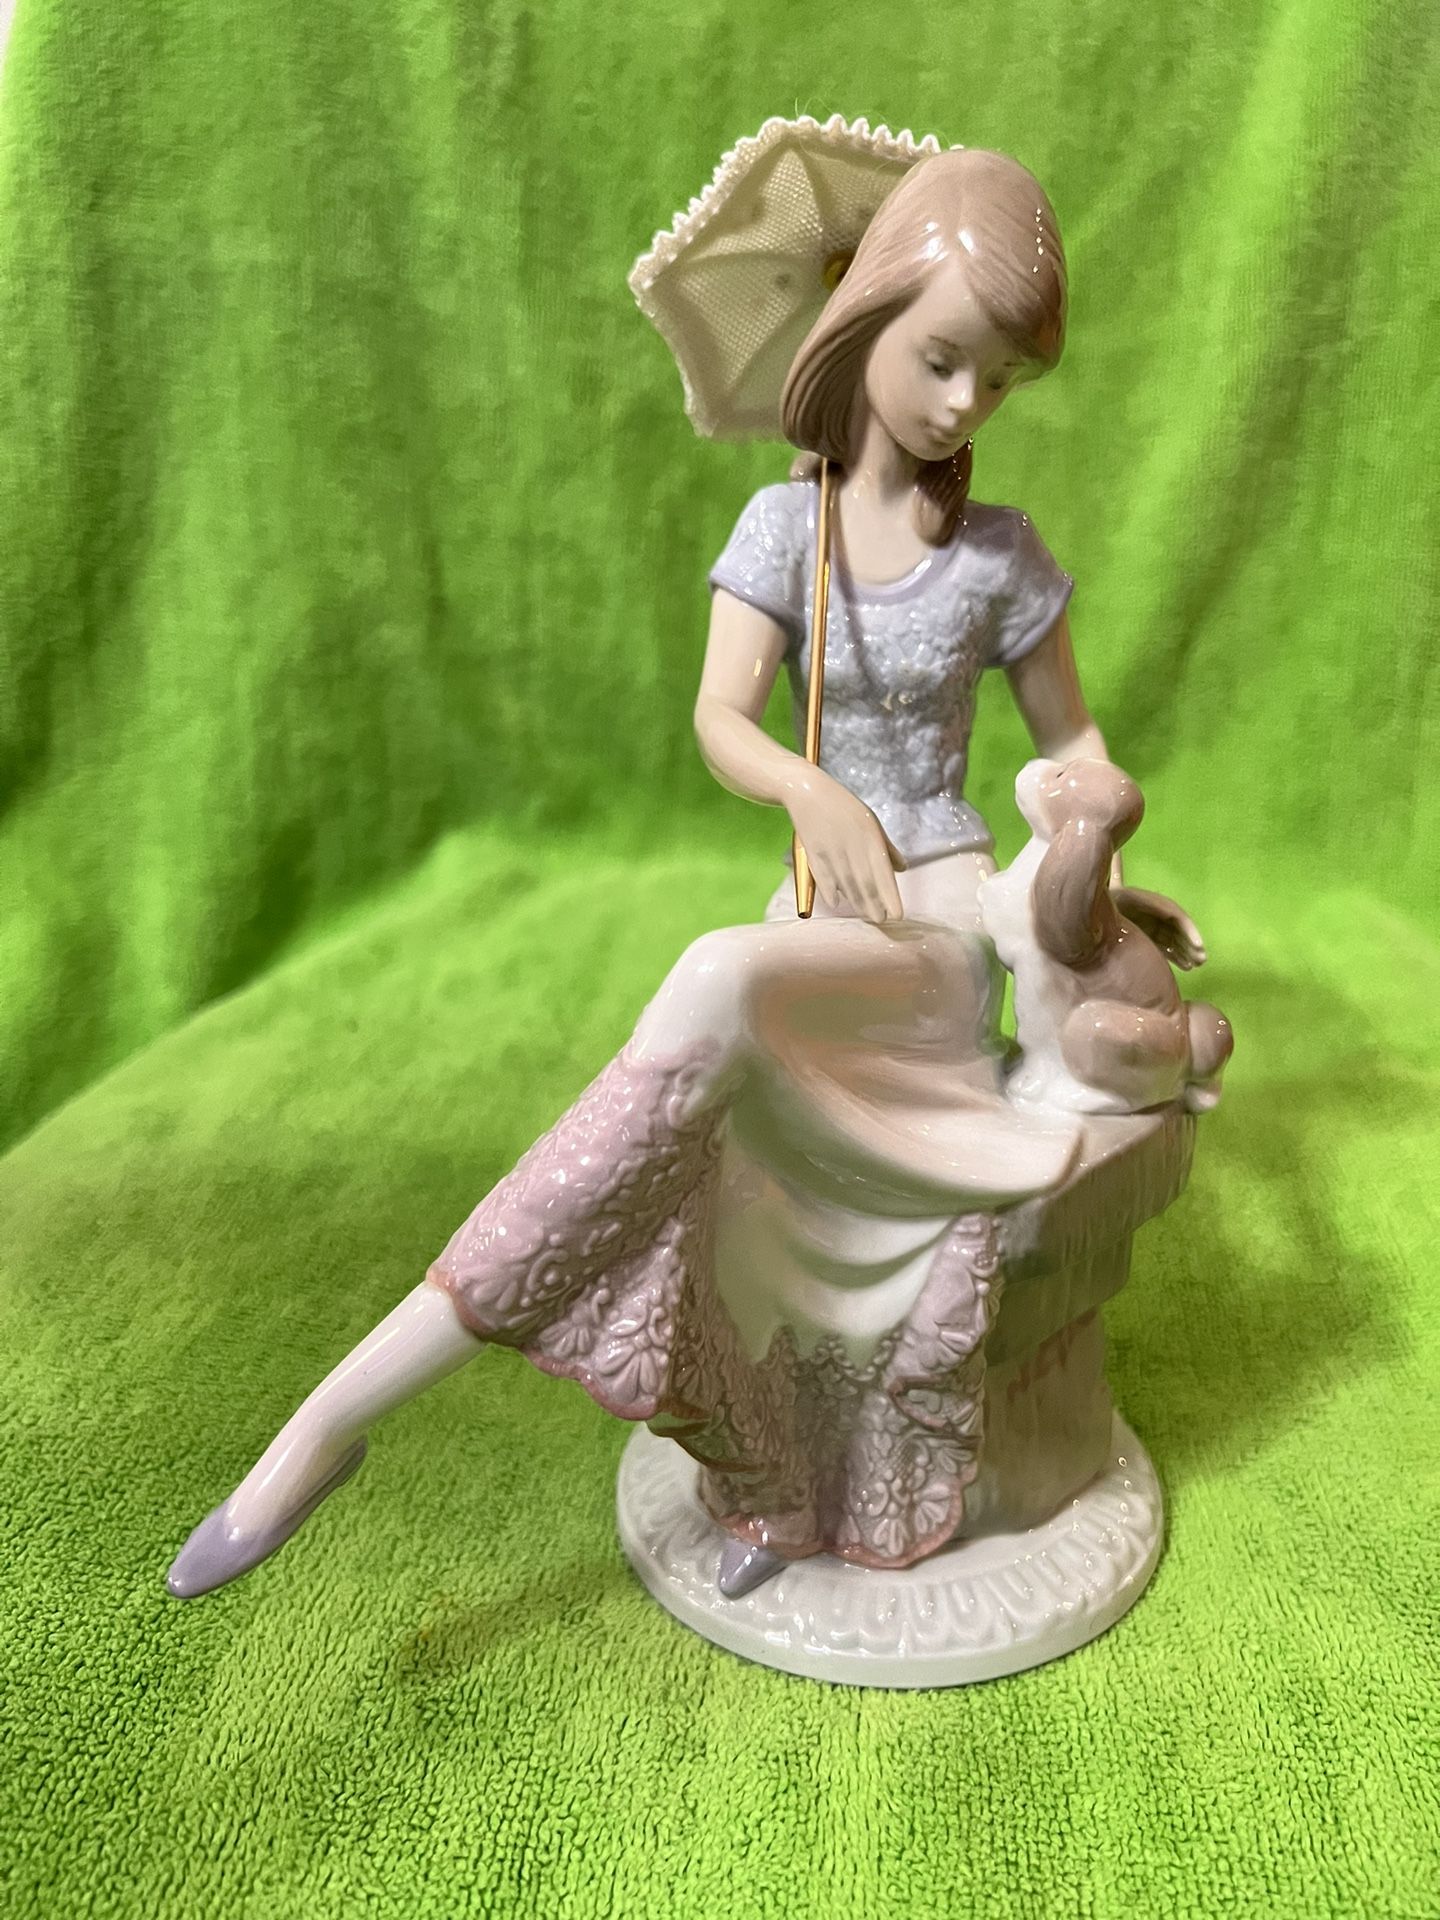 Lladro Picture Perfect Lady With Parasol And Puppy Figurine #7612